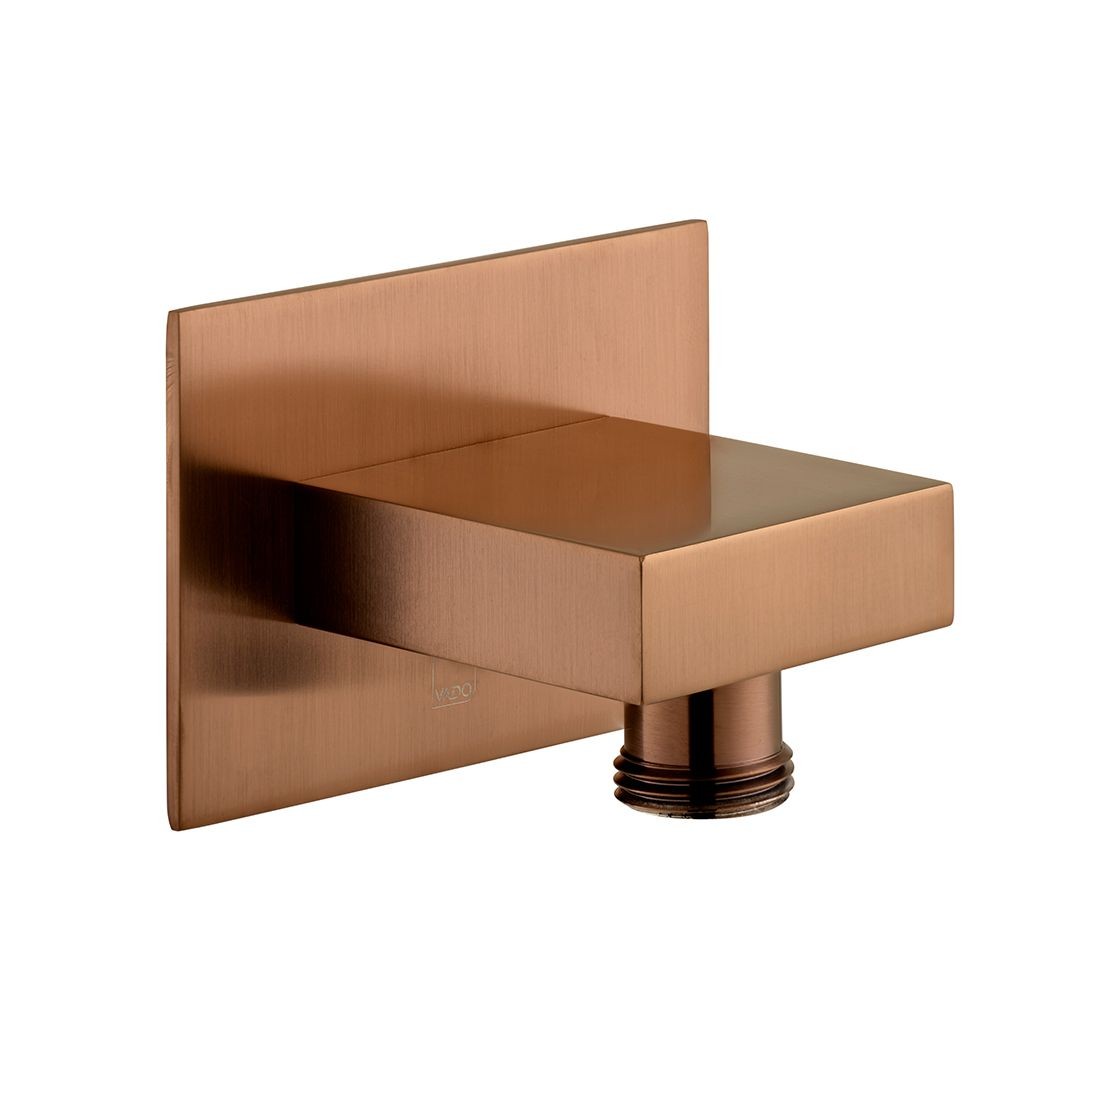 Individual by Vado Wall Outlet Square Brushed Bronze [IND-OUTLET/SQ-BRZ]